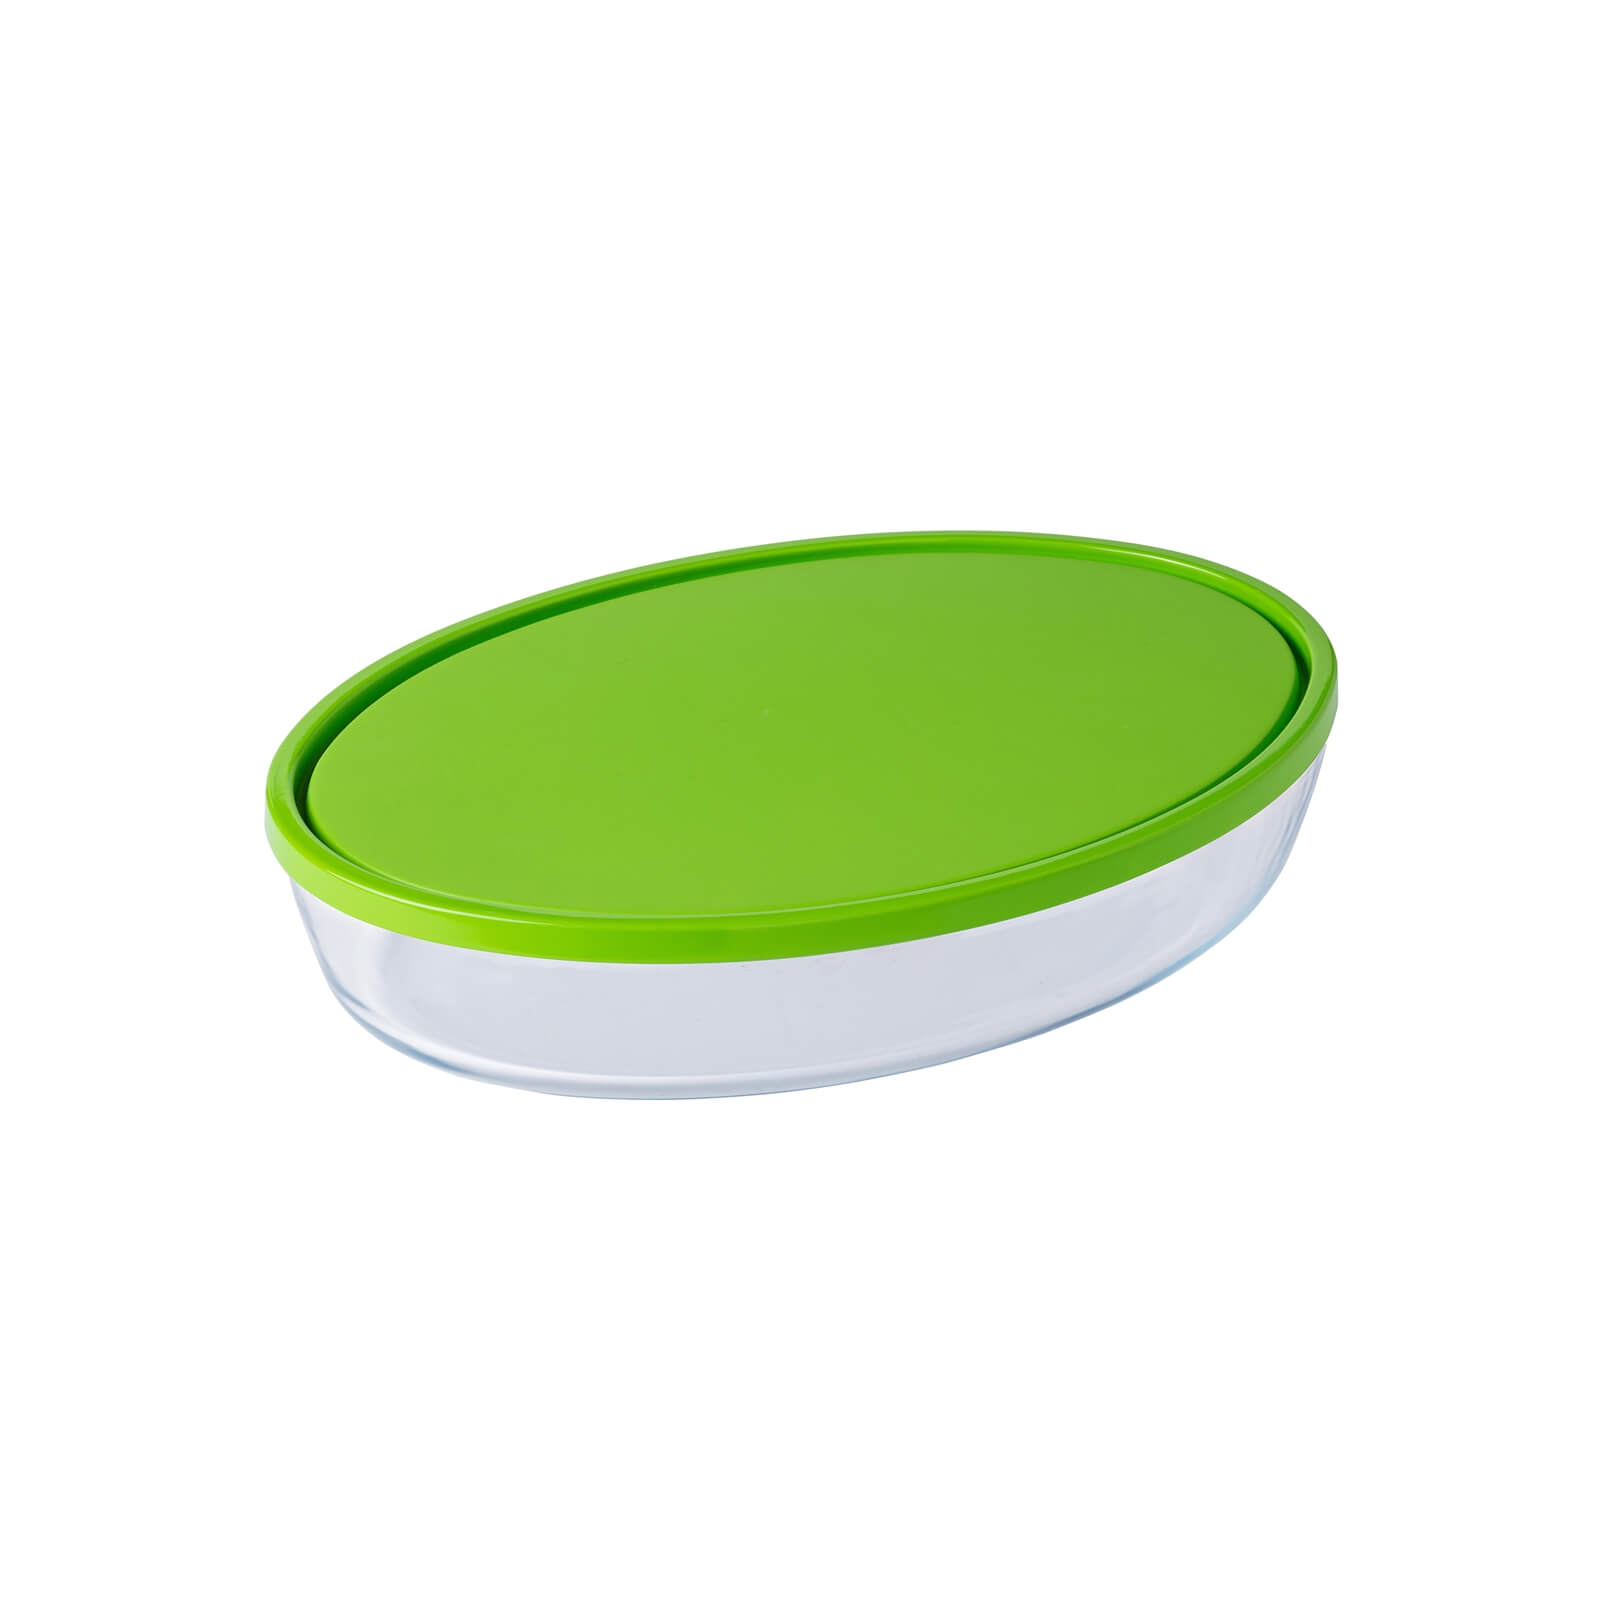 Pyrex Cook & Store Oval Dish with Green Lid